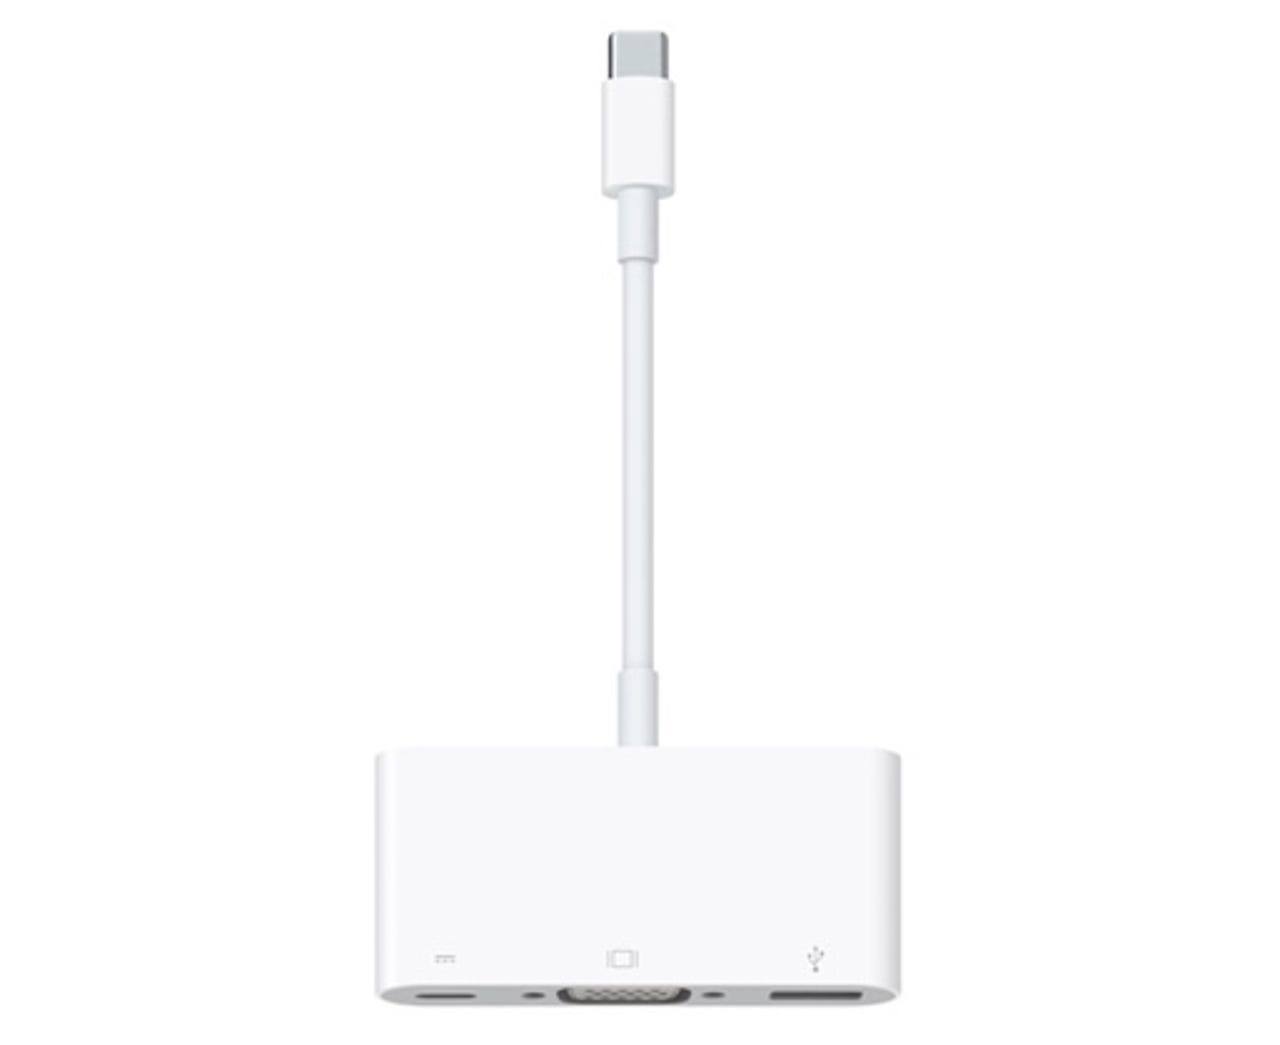 #5: Hubs and dongles galore